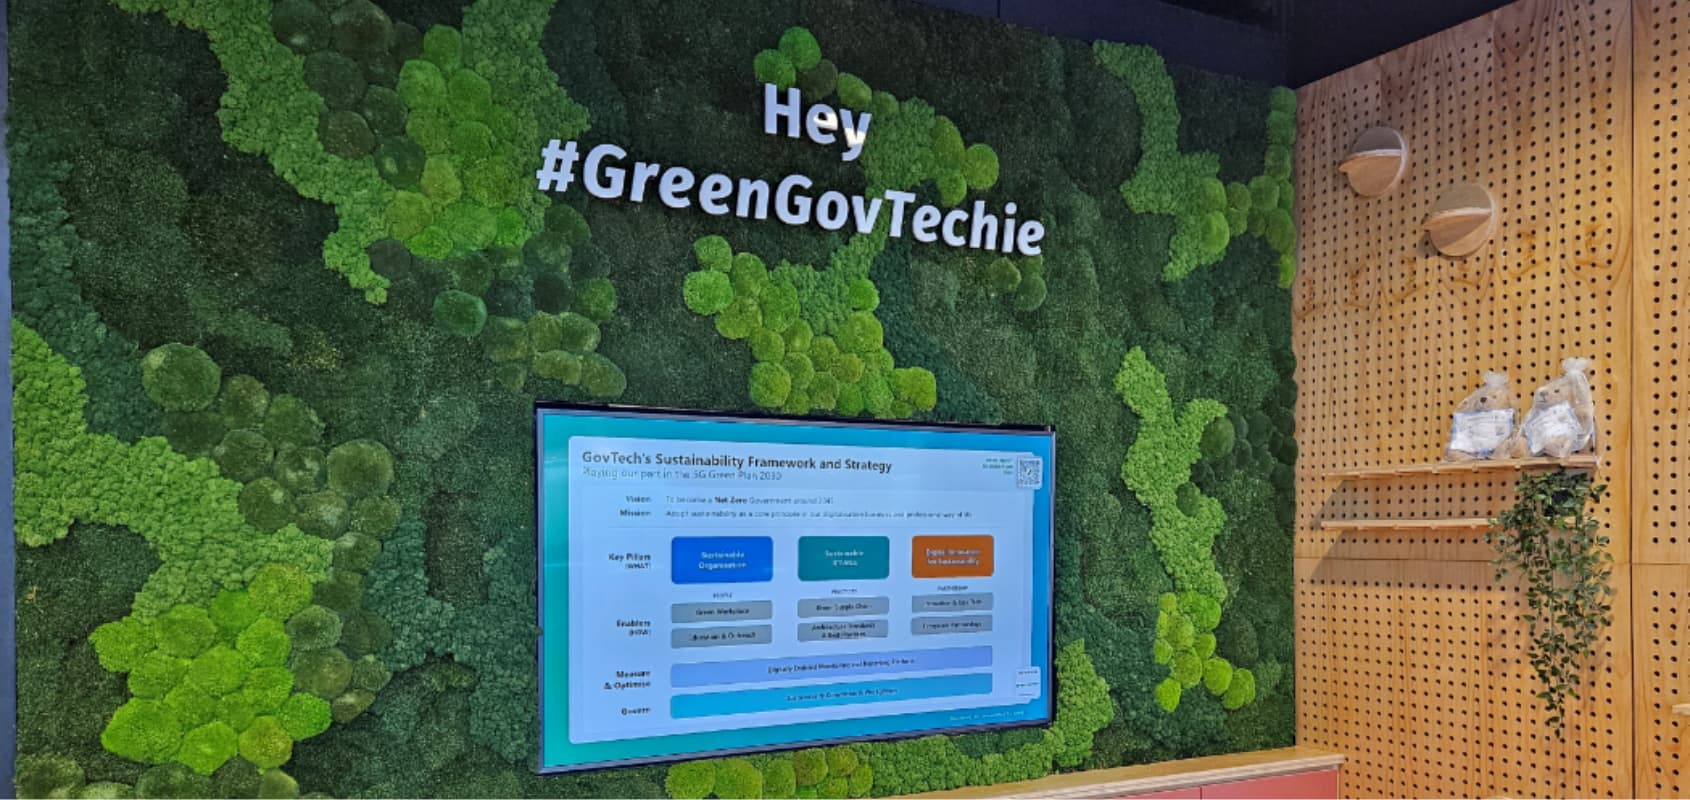 GovTechies practicing sustainability and eco-friendly policies and actions